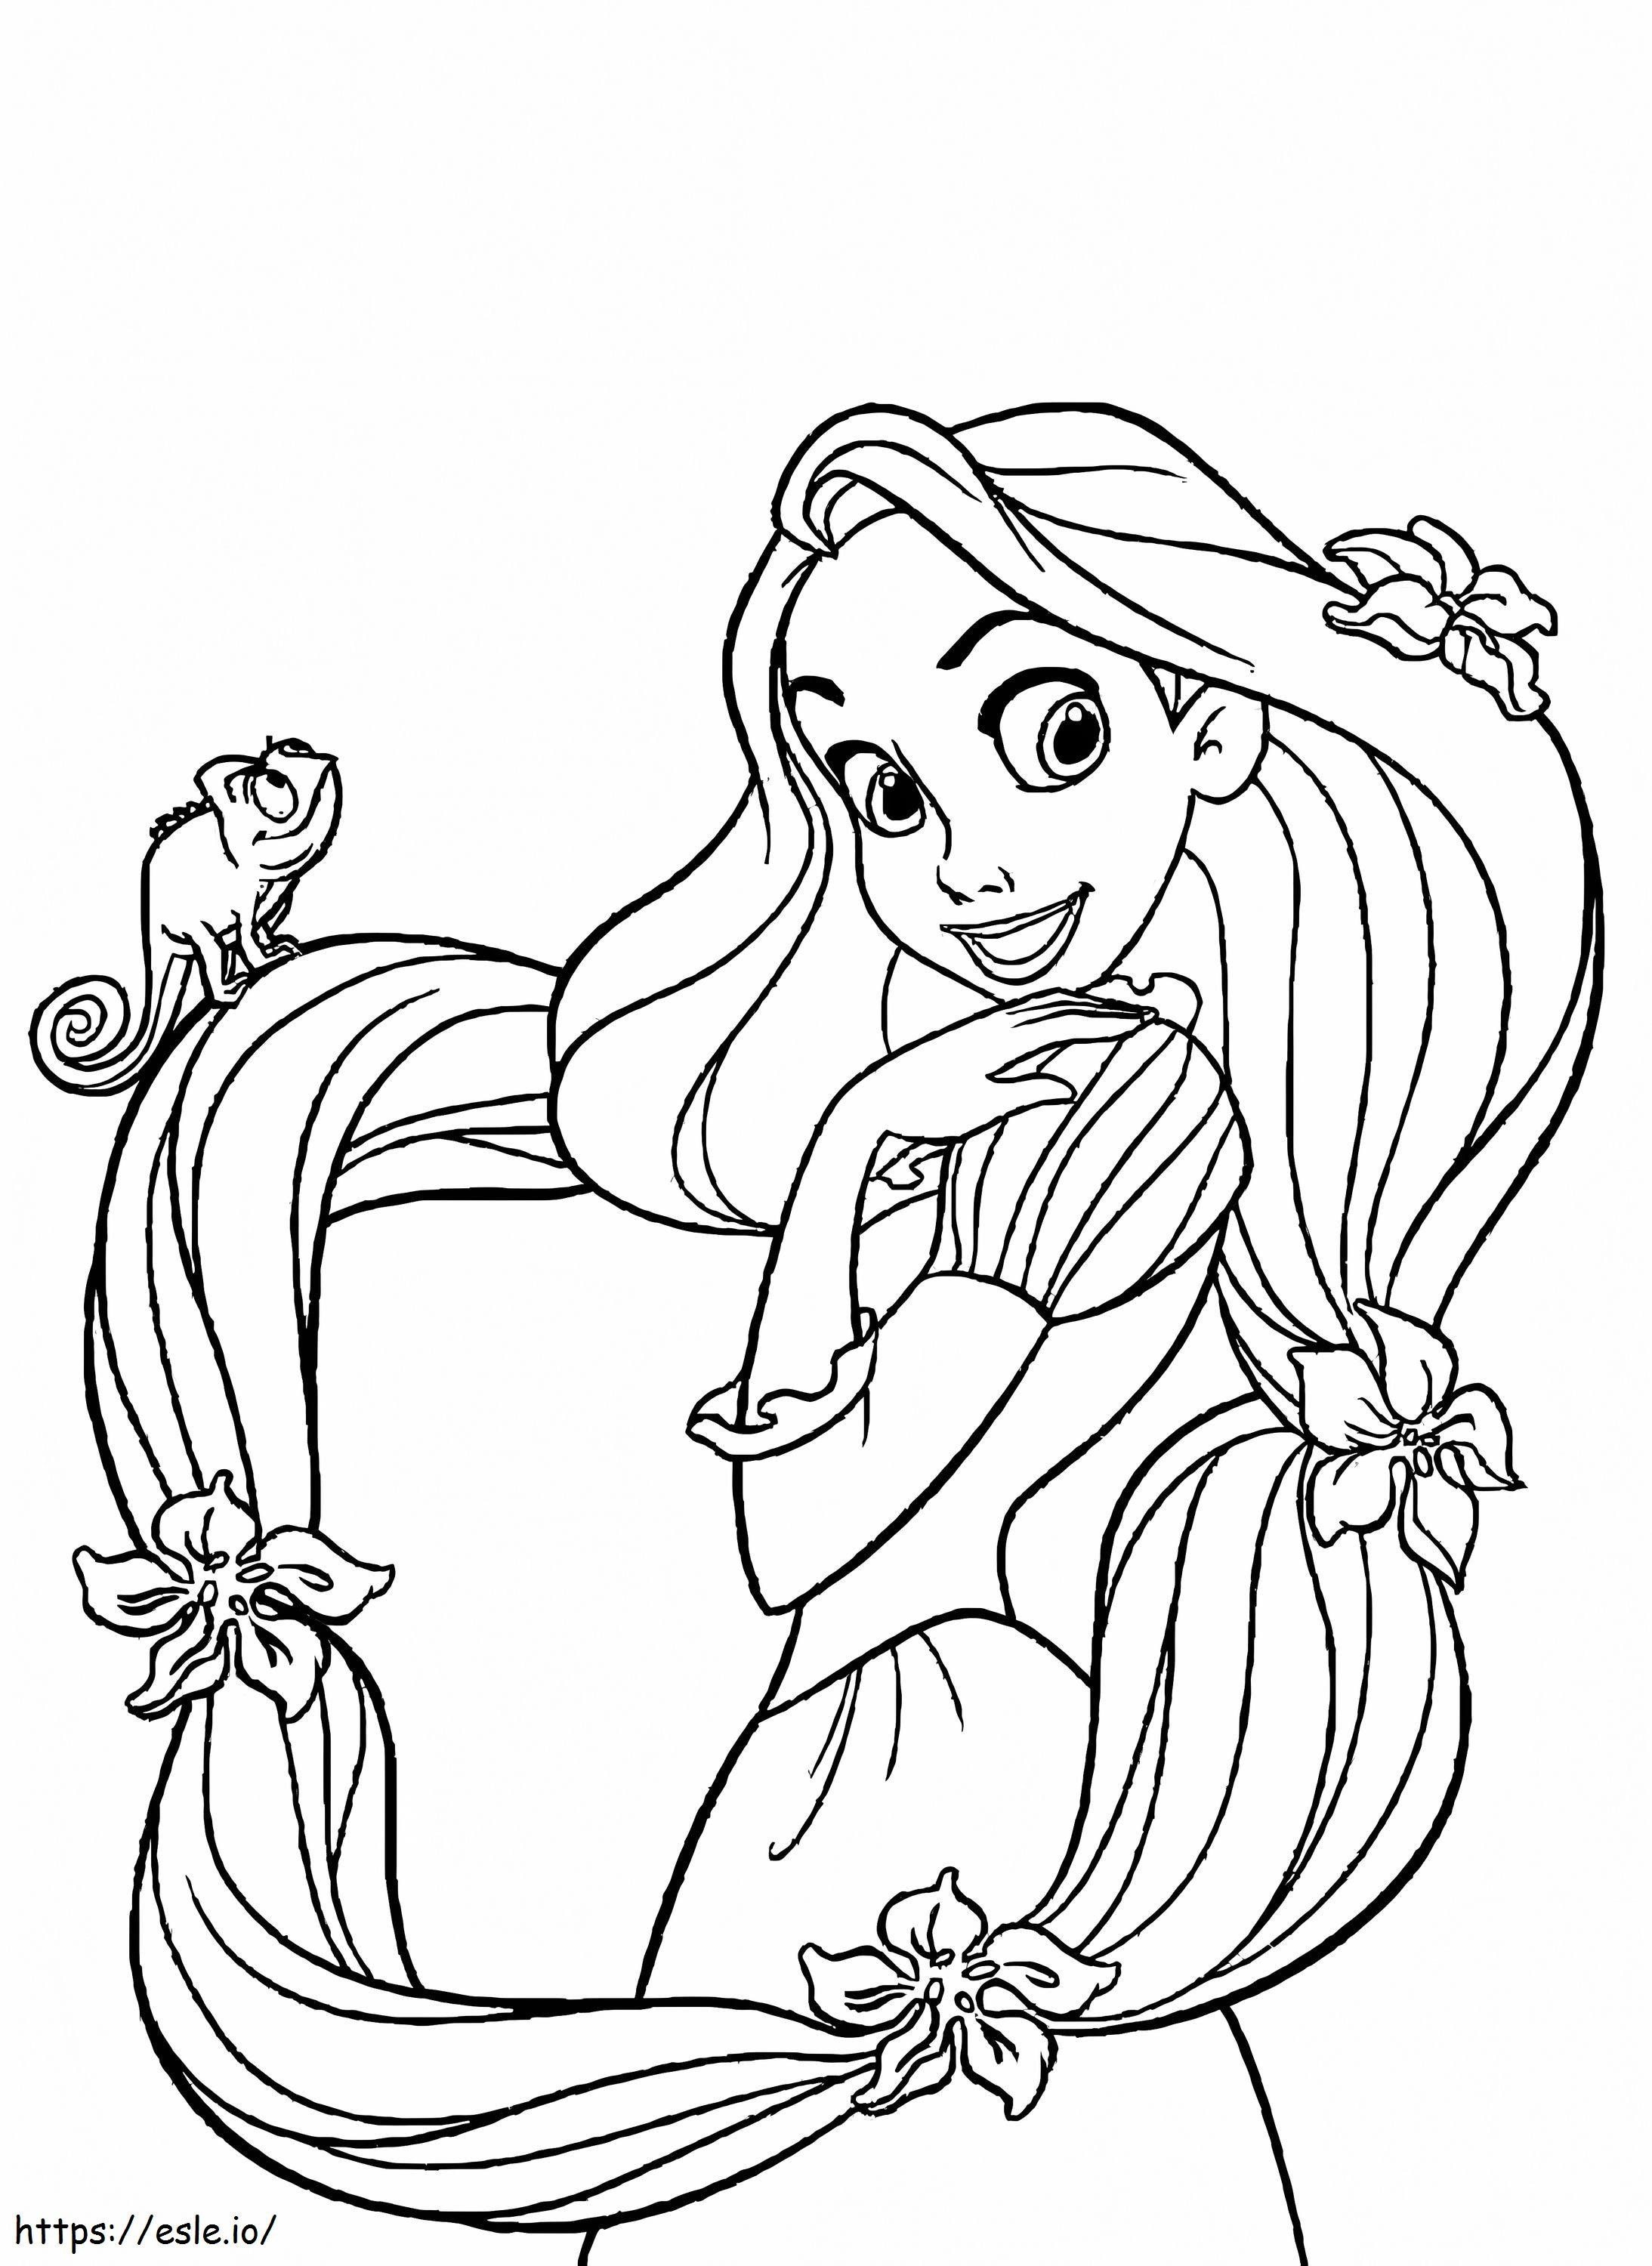 Basic Rapunzel With Gecko coloring page